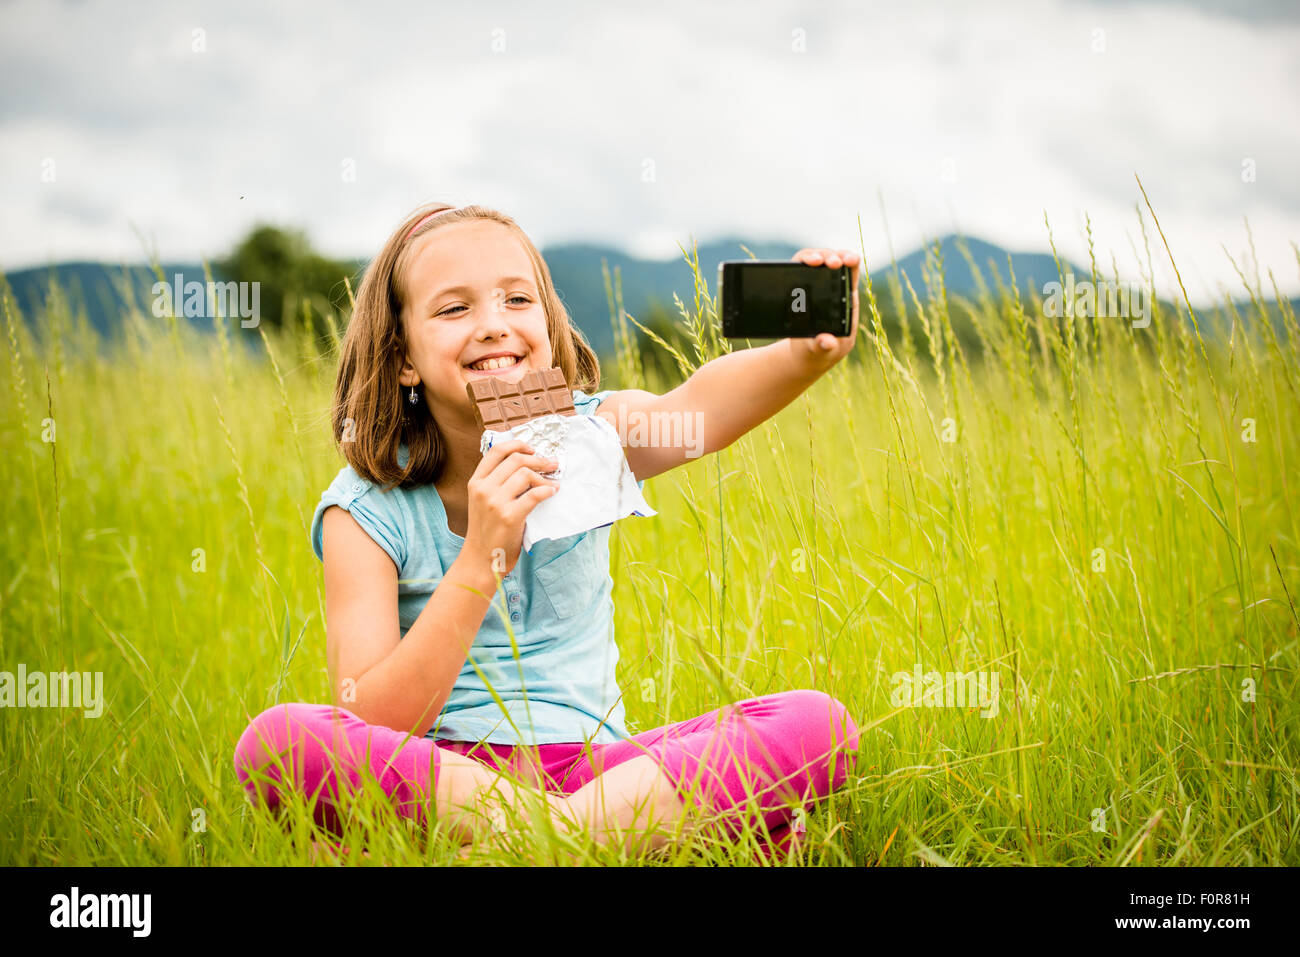 Child is taking photo with mobile phone camera while eating chocolate outdoor in nature Stock Photo